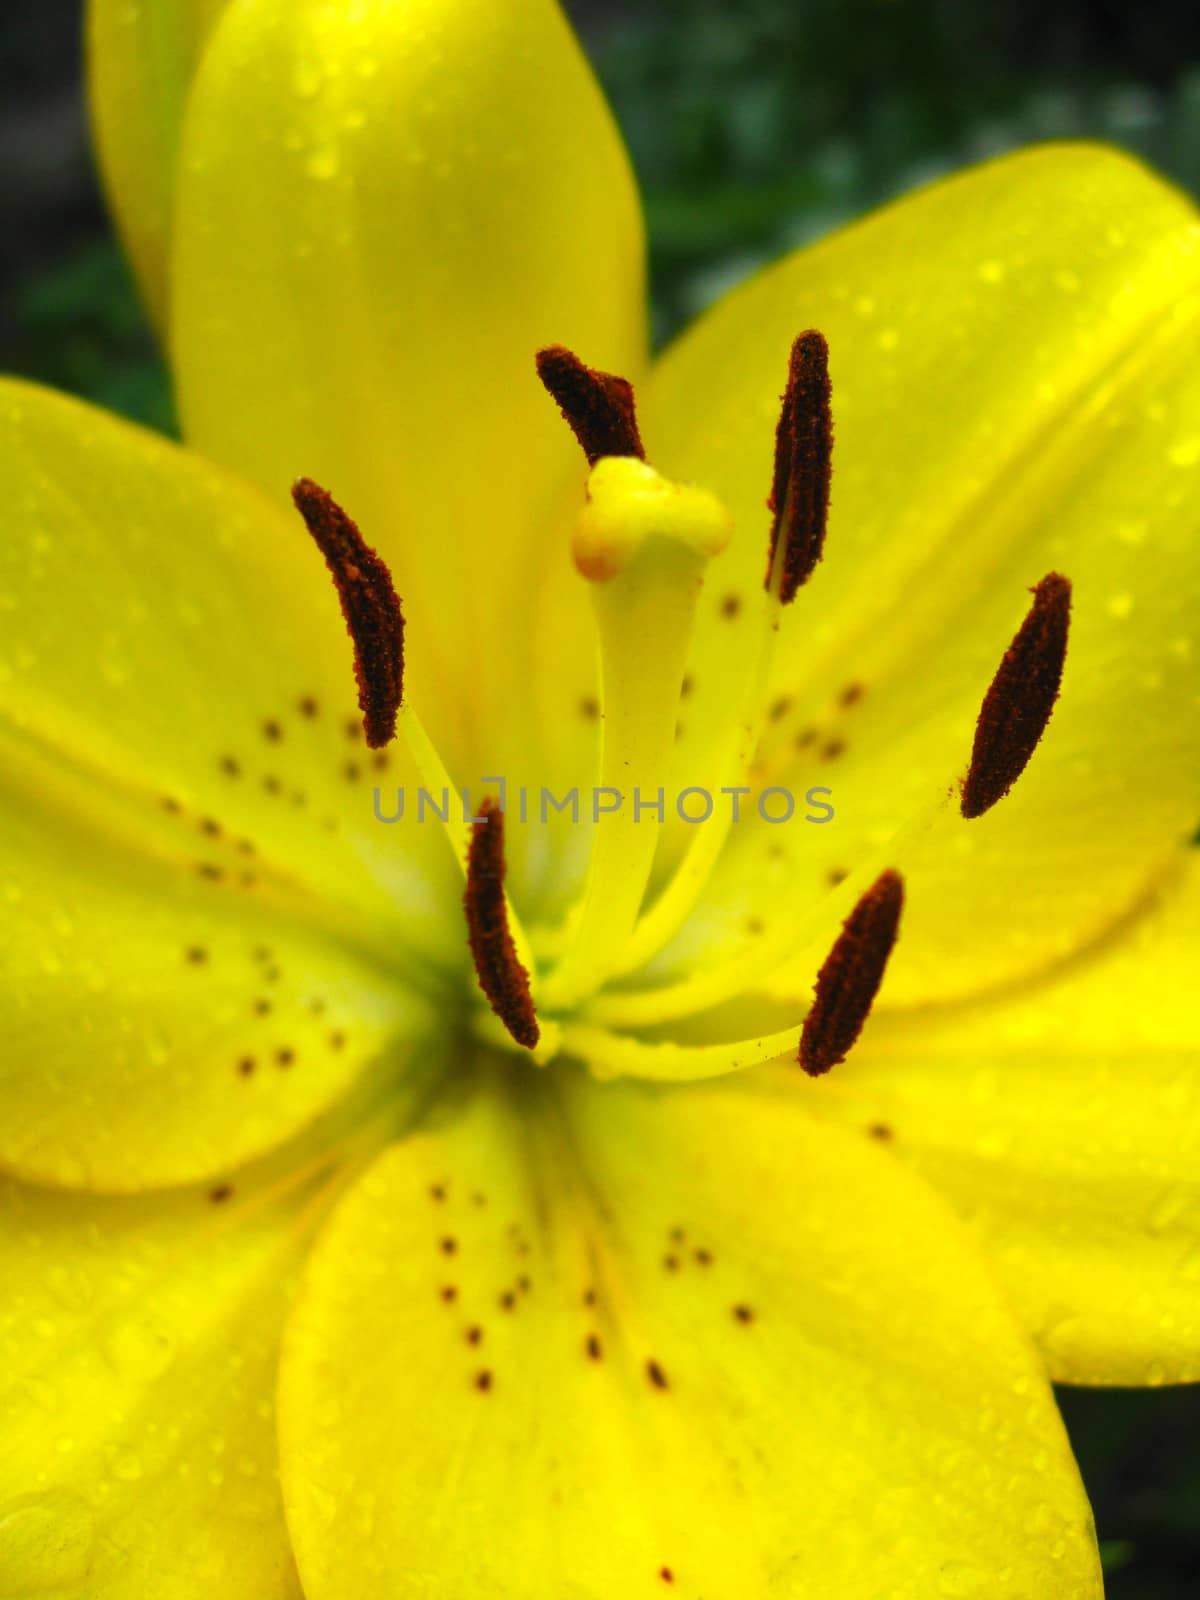 lily with stamens full of pollen by alexmak